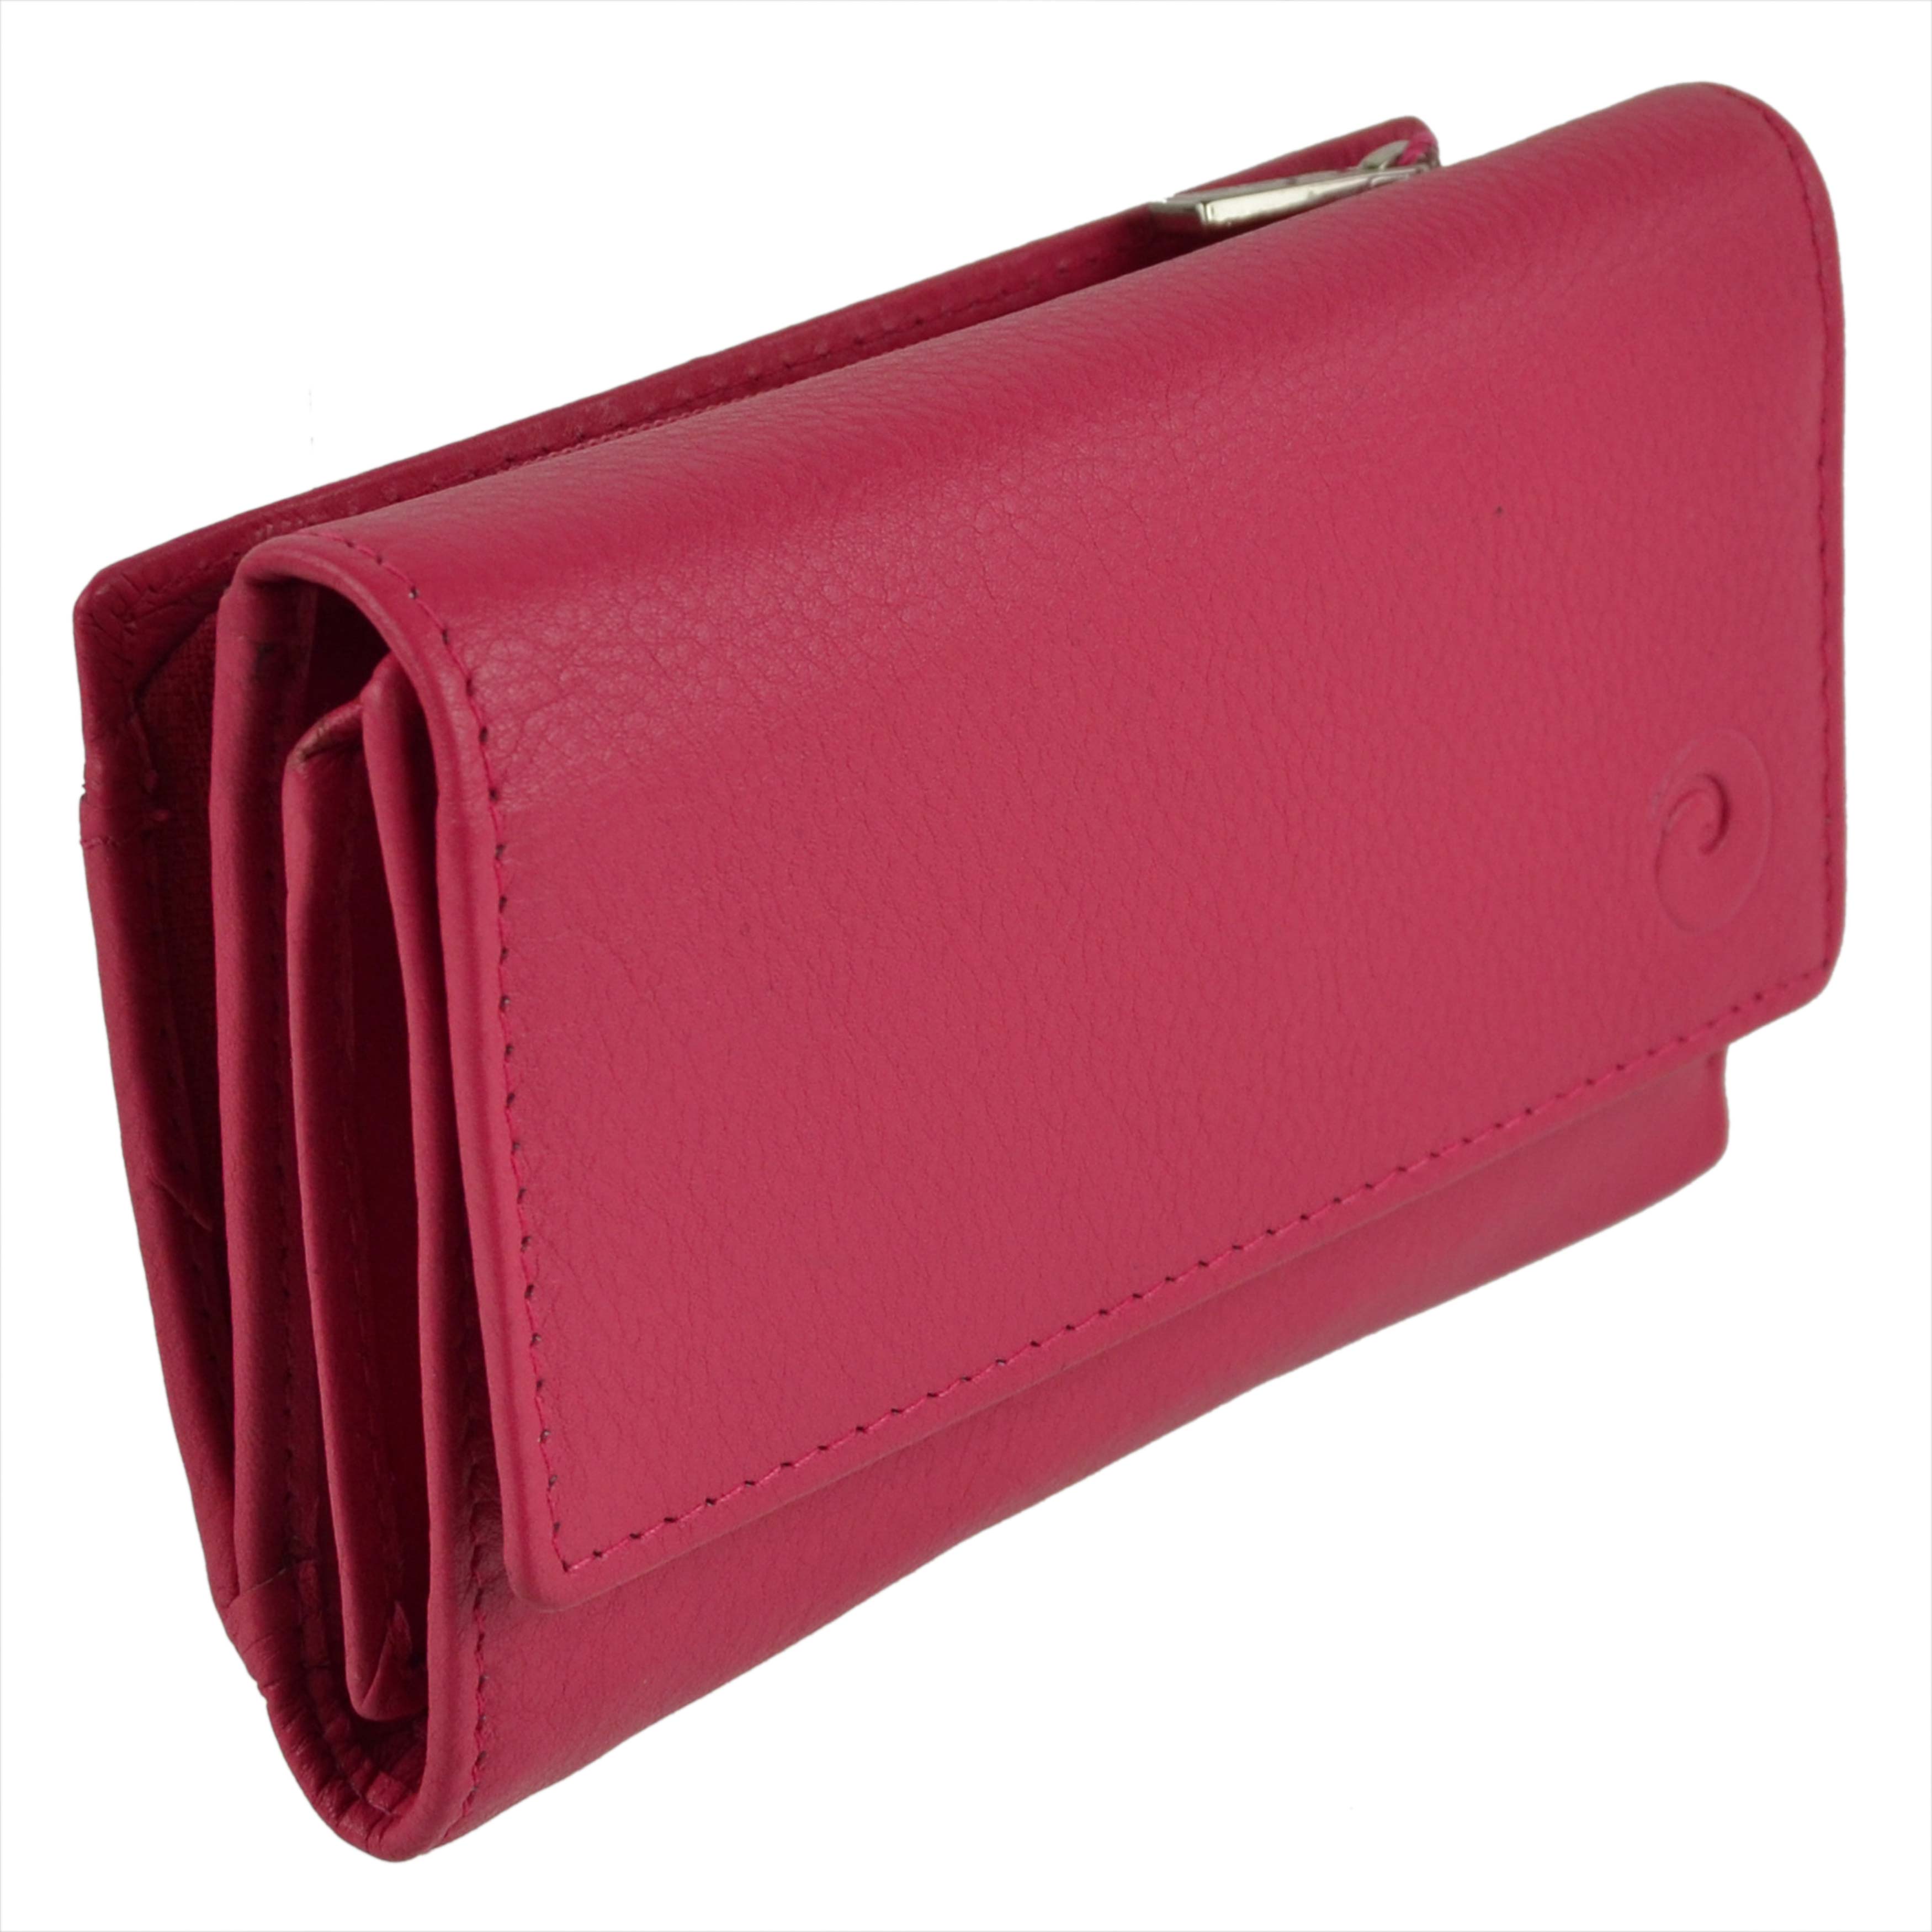 Quality Ladies Soft Leather RFID Protection Purse Wallet by Mala Origin ...